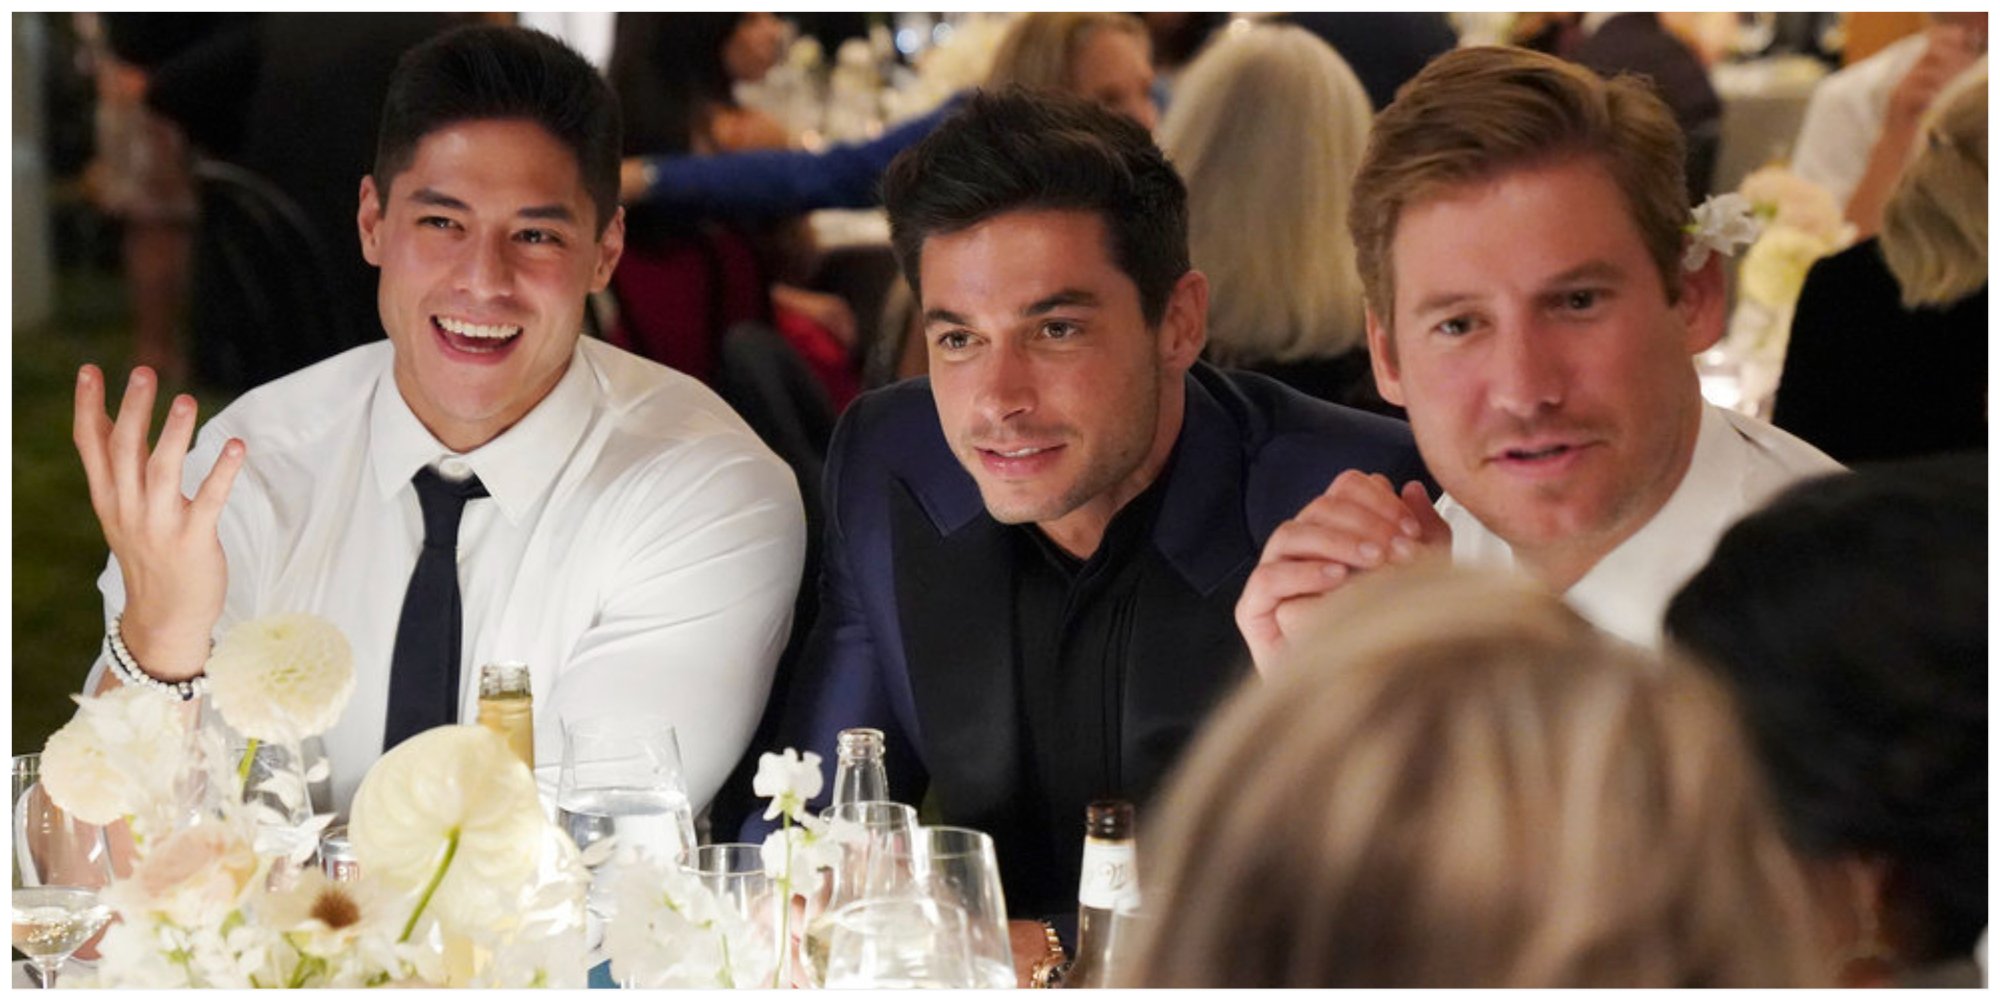 Alex Wach, Andrea Denver, Austen Kroll talk to someone at a table on 'Summer House' 